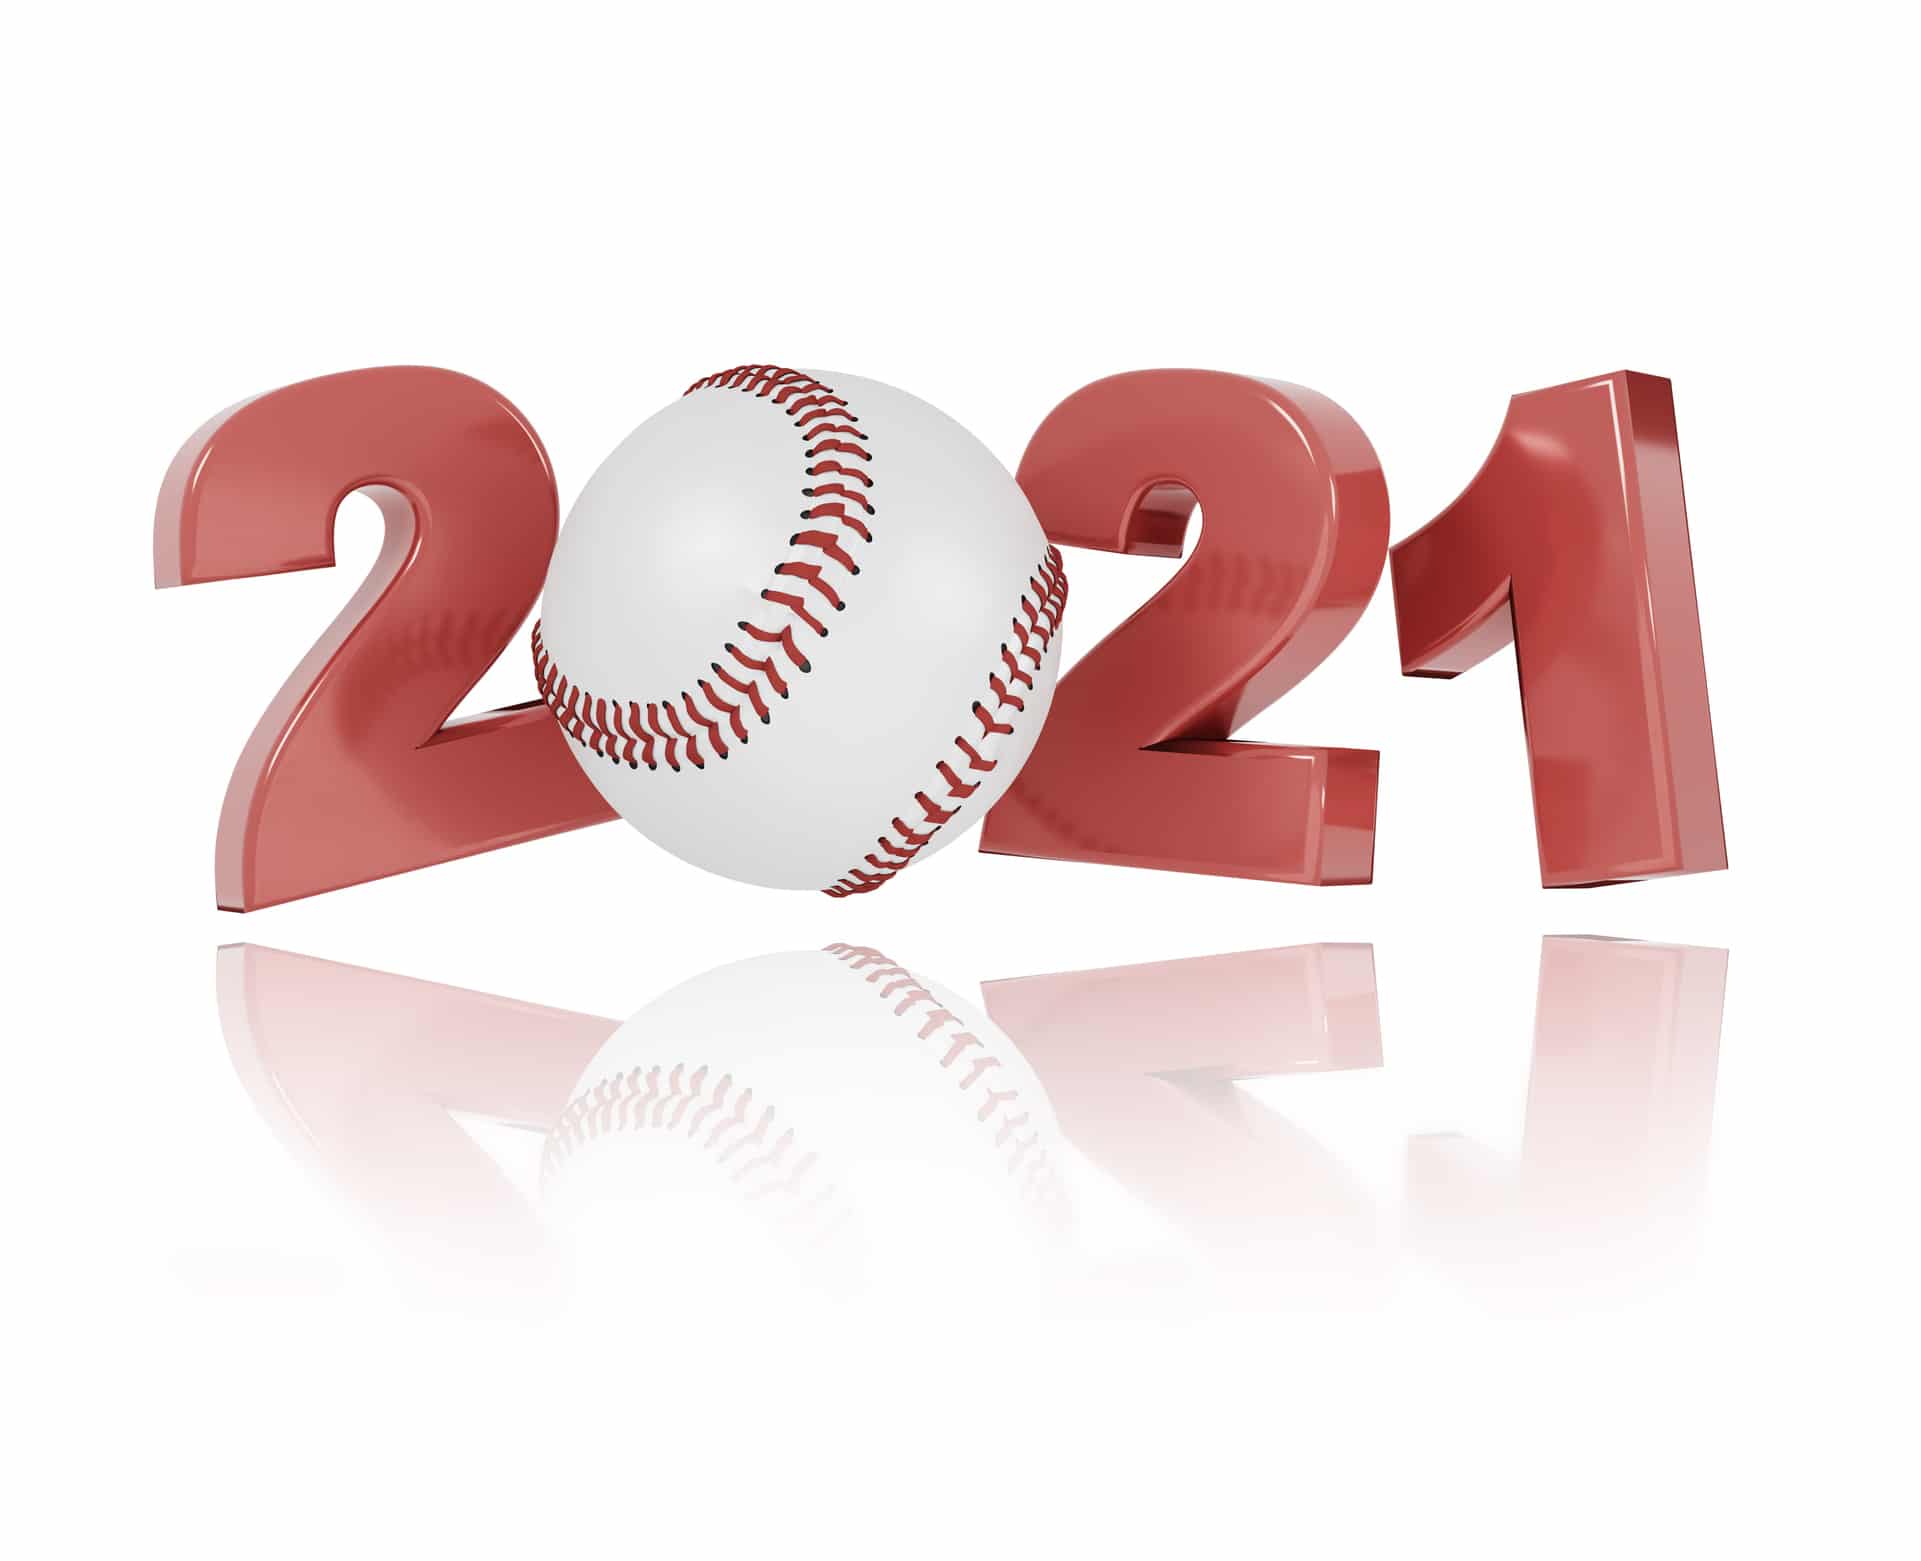 Baseball Preview: What To Expect In 2021